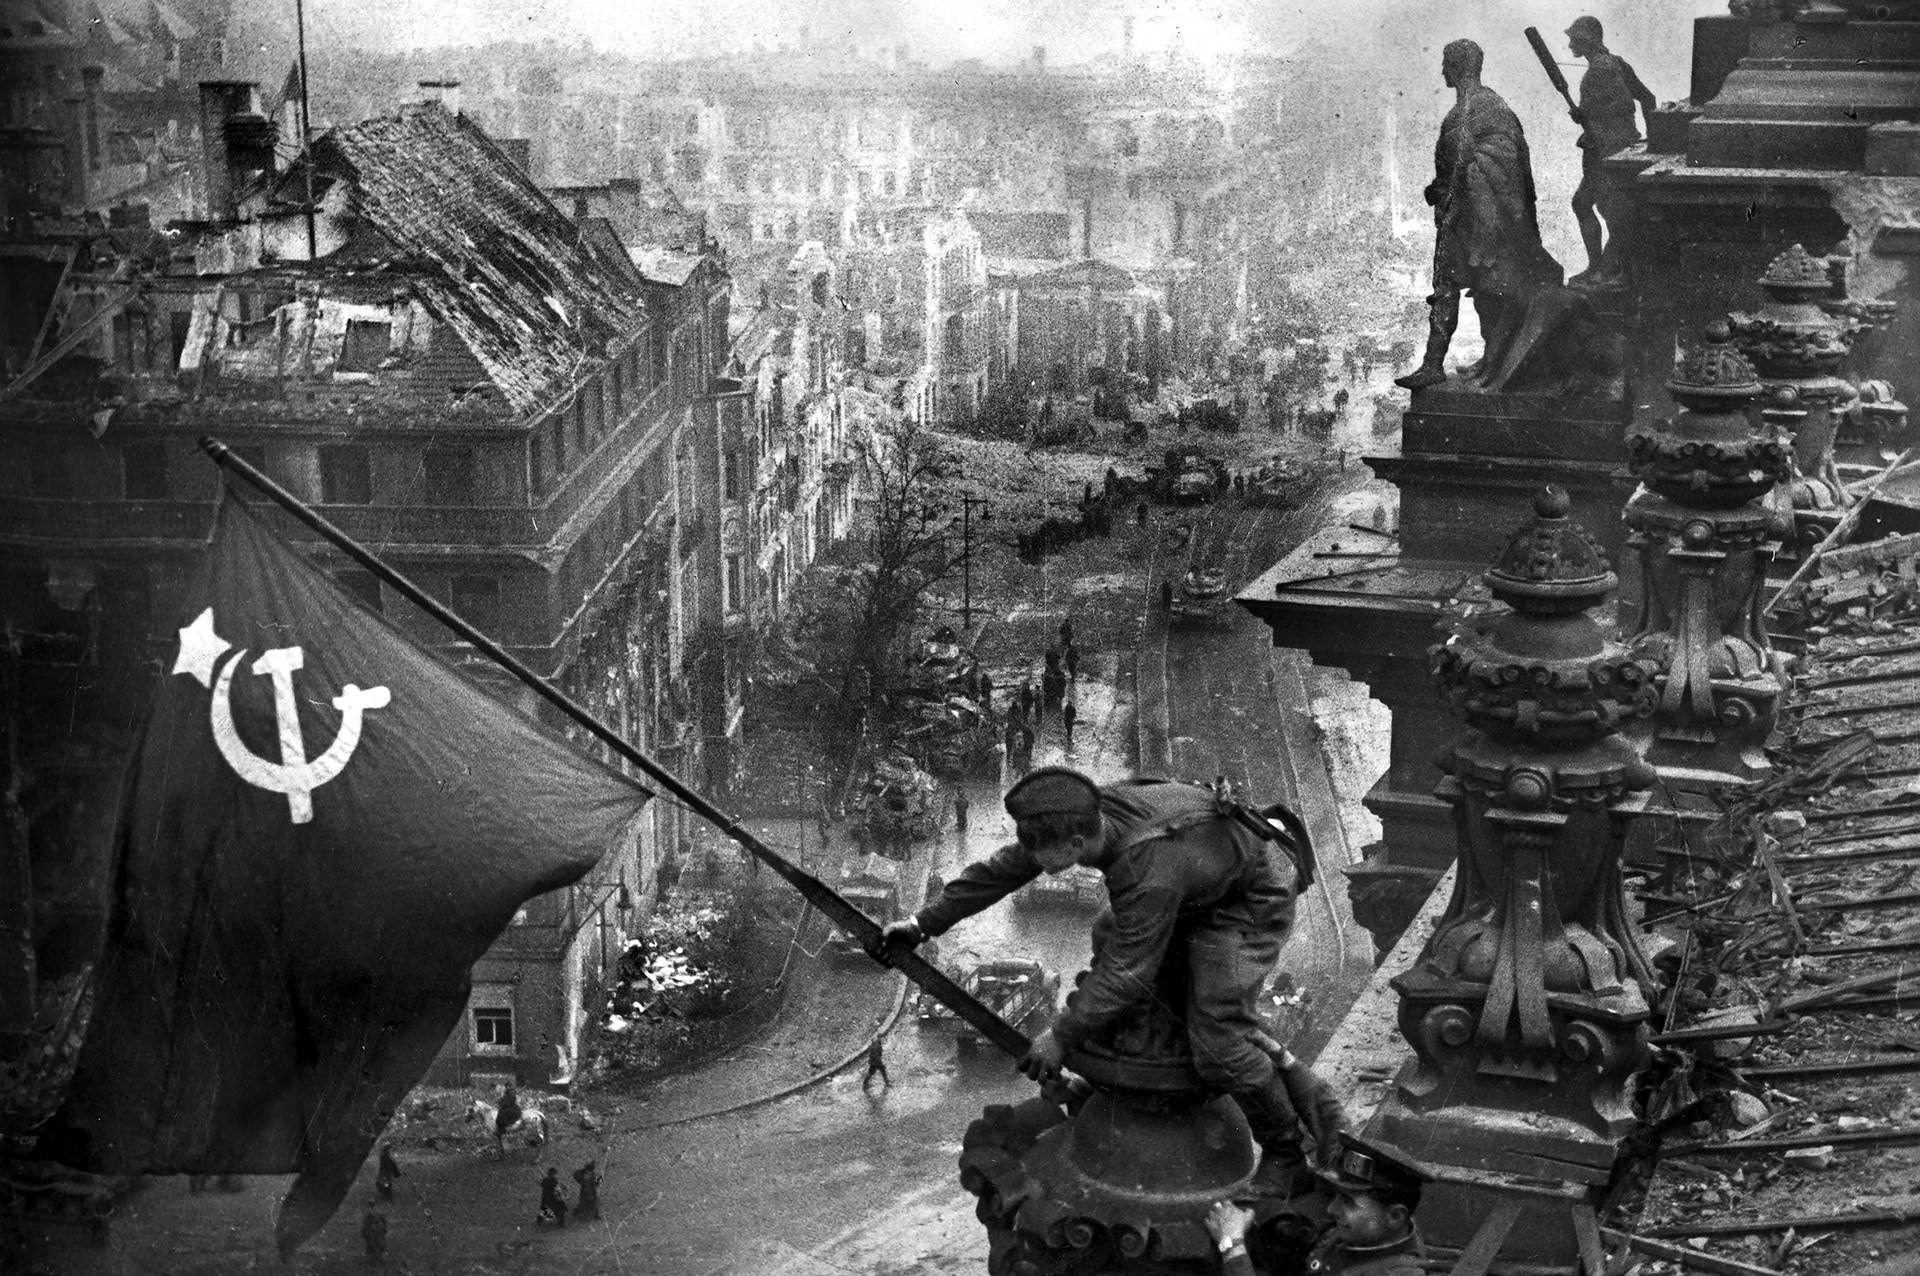 To the Soviets, this photo by Yevgeny Khaldei of Red Army soldiers raising the Soviet Union flag on top of the Reichstag over battered Berlin was as iconic and symbolic of victory as the February 1945 shot of U.S. Marines raising the Stars and Stripes atop Mount Suribachi at <a href=